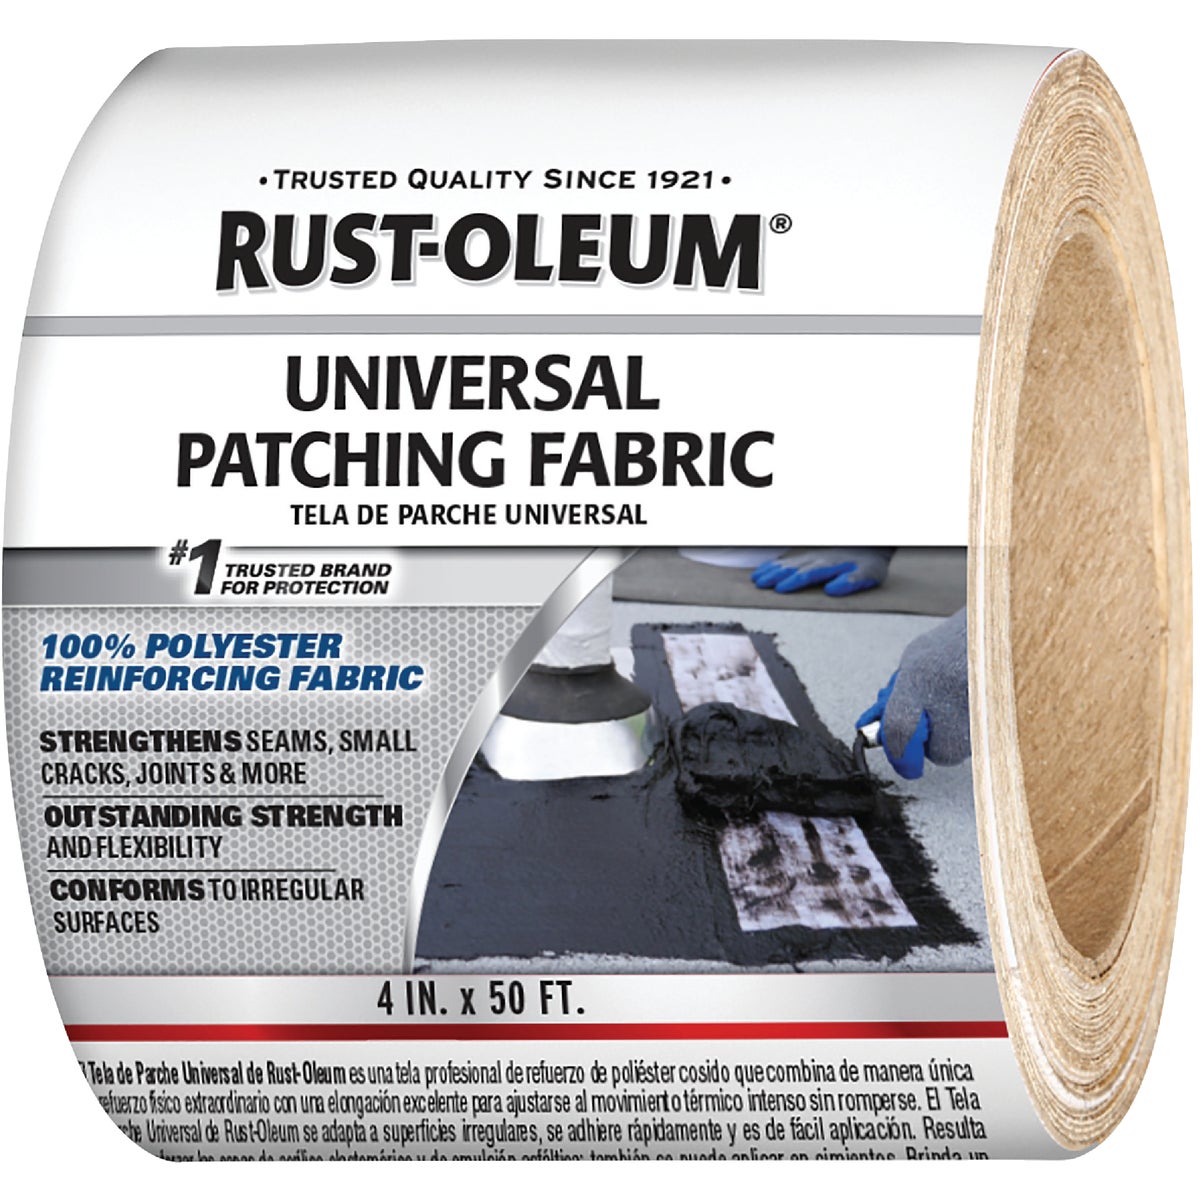 Rust-Oleum 4 In. x 50 Ft. Universal Patching Fabric